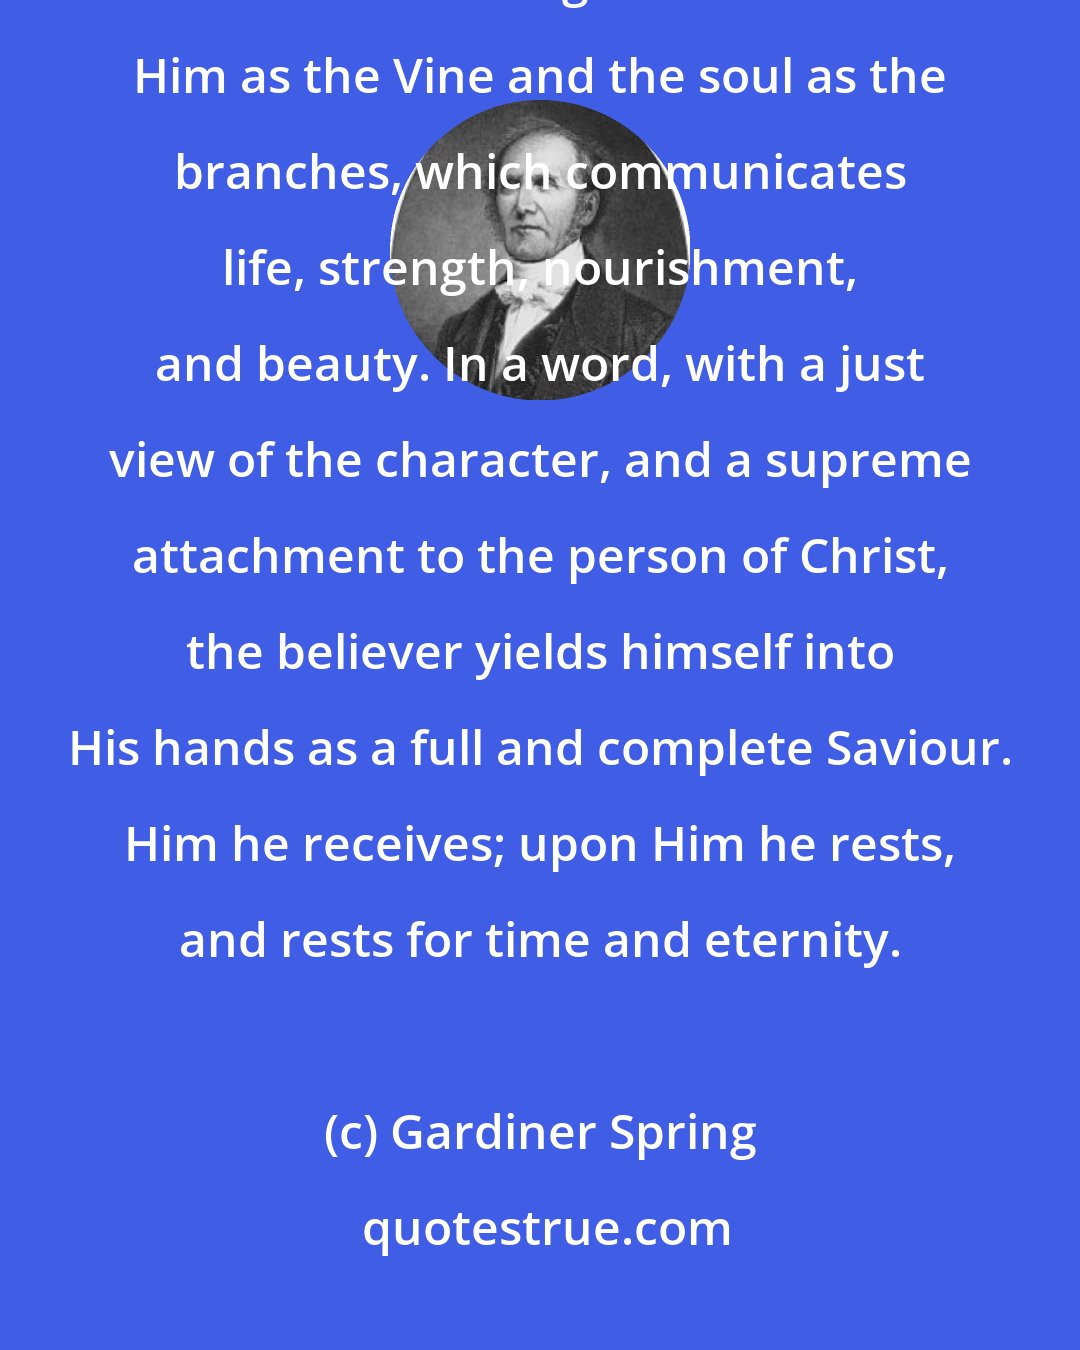 Gardiner Spring: The act of the soul, in surrendering itself into the hands of Christ, forms a connecting bond between Him as the Vine and the soul as the branches, which communicates life, strength, nourishment, and beauty. In a word, with a just view of the character, and a supreme attachment to the person of Christ, the believer yields himself into His hands as a full and complete Saviour. Him he receives; upon Him he rests, and rests for time and eternity.